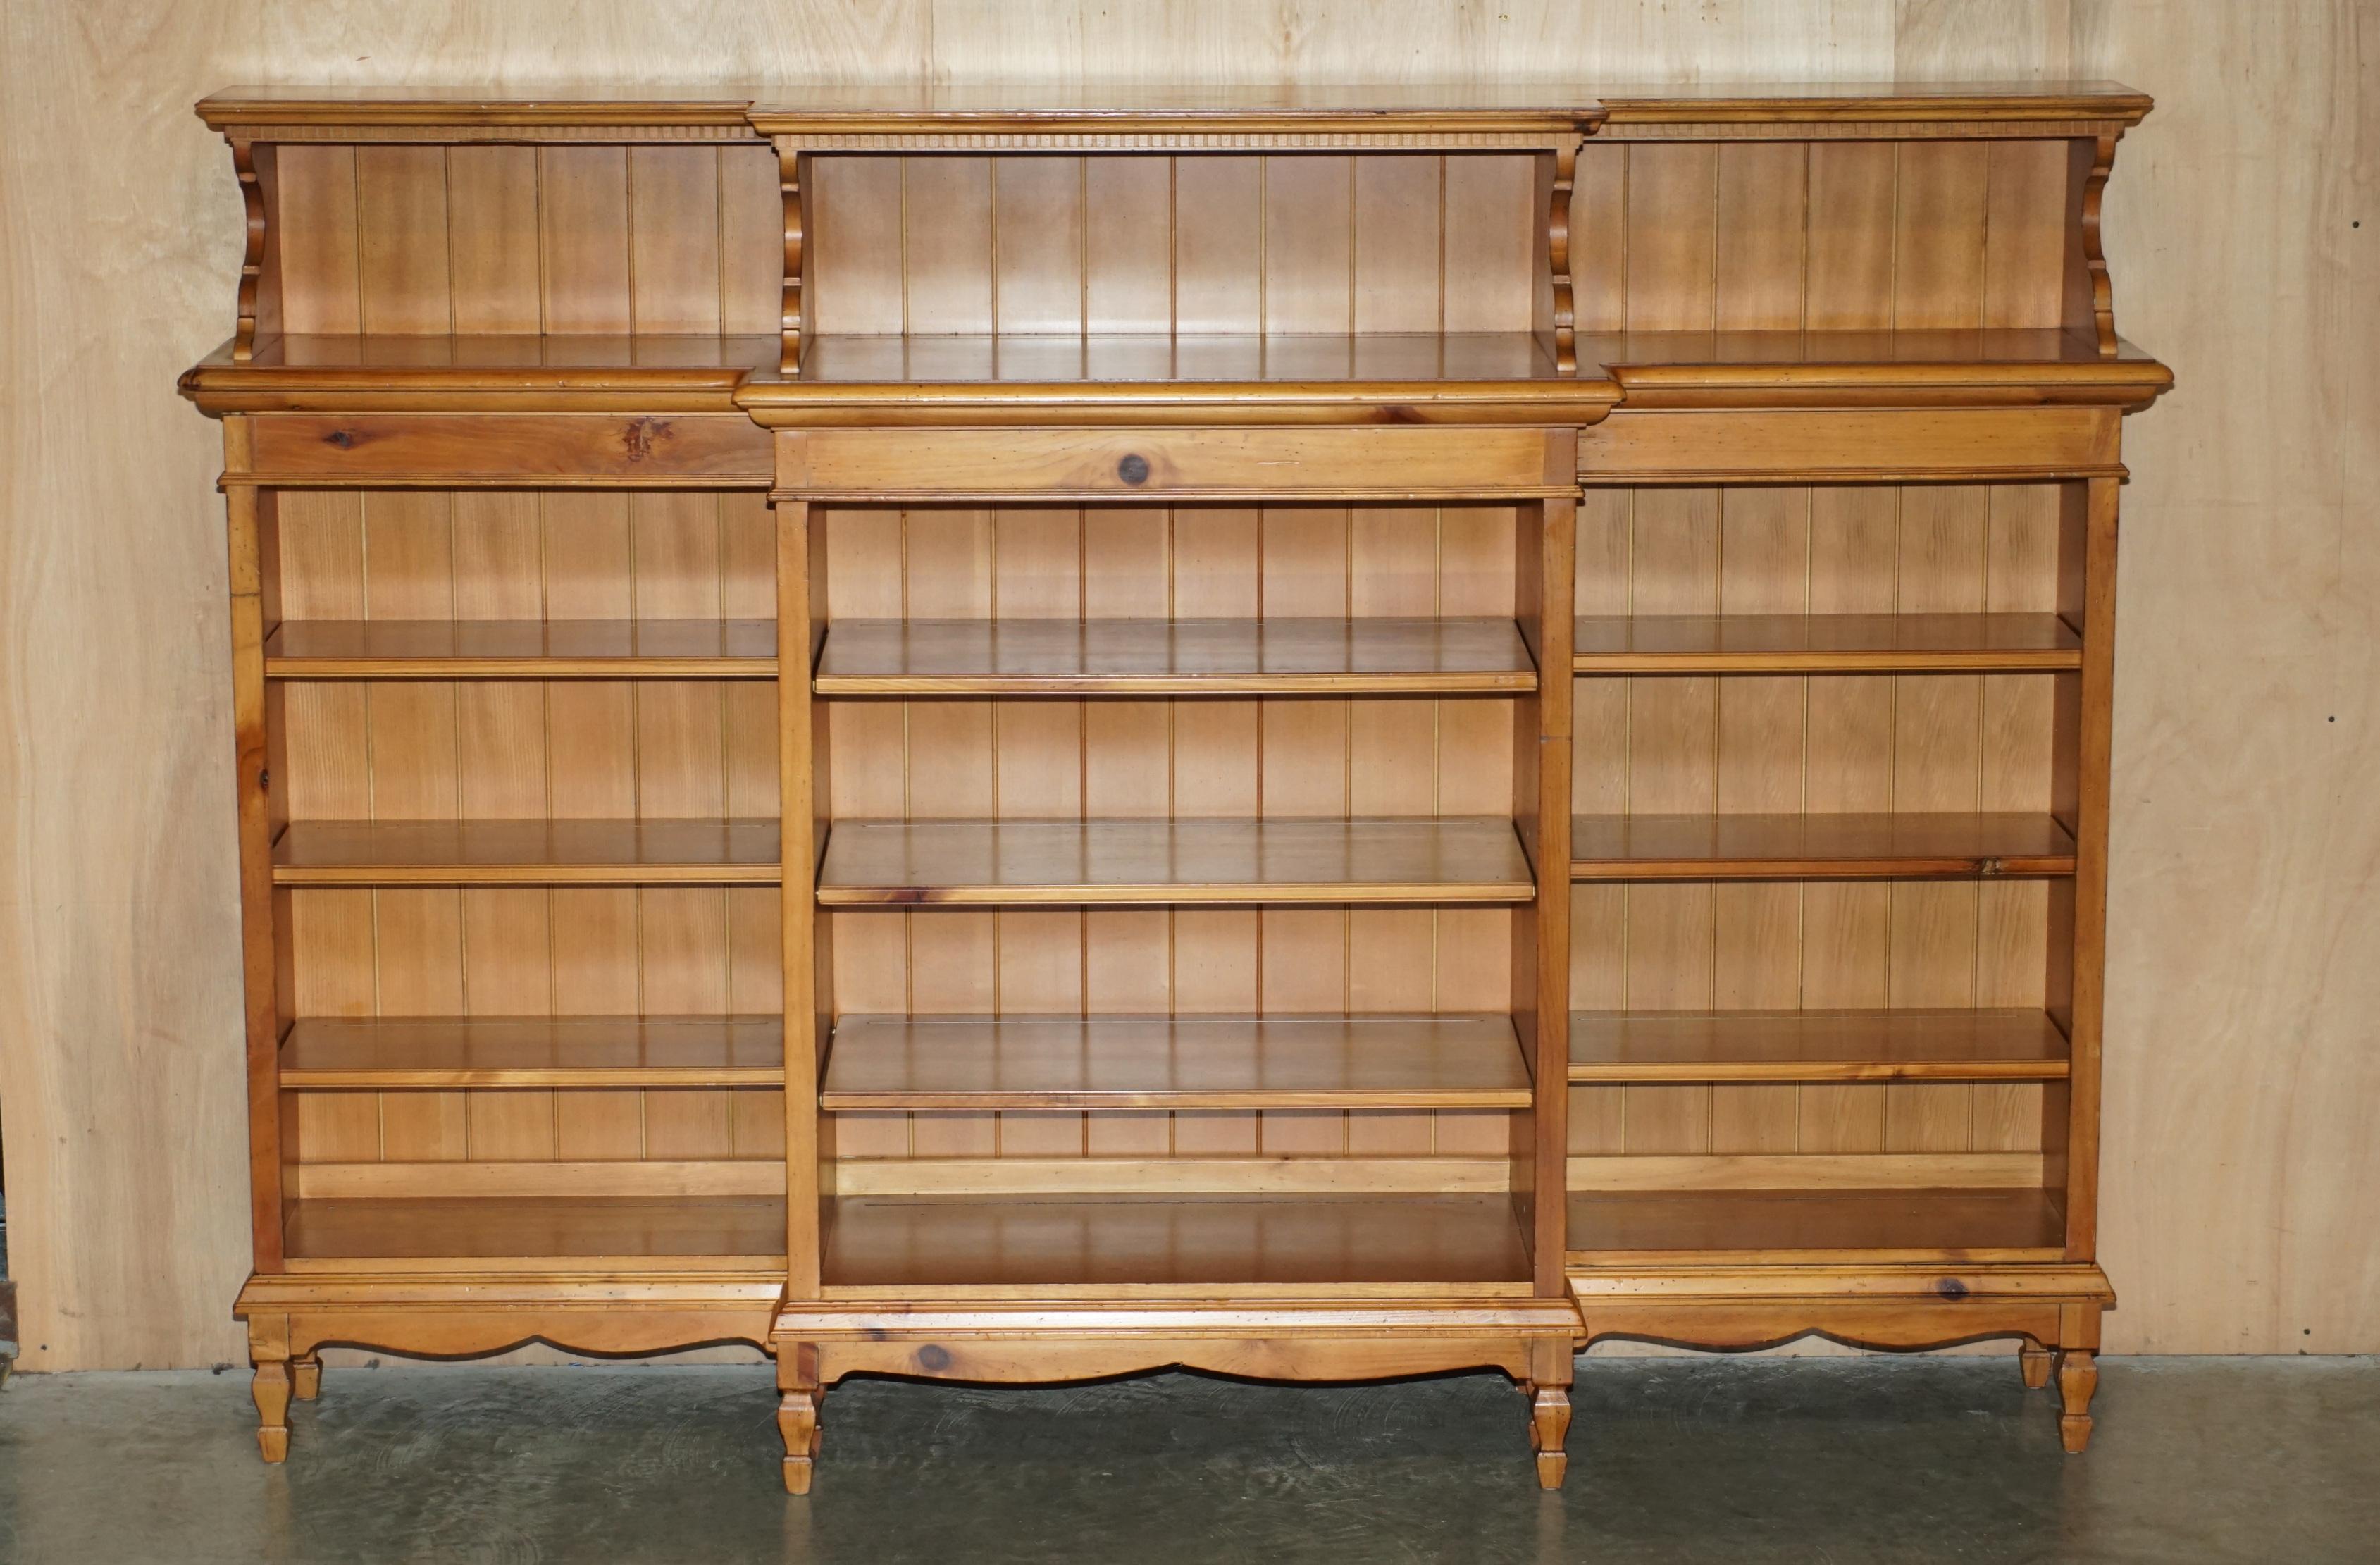 Royal House Antiques

Royal House Antiques is delighted to offer for sale this stunning Ralph Lauren extra large open library breakfront bookcase based on a design by Morris & Co

Please note the delivery fee listed is just a guide, it covers within